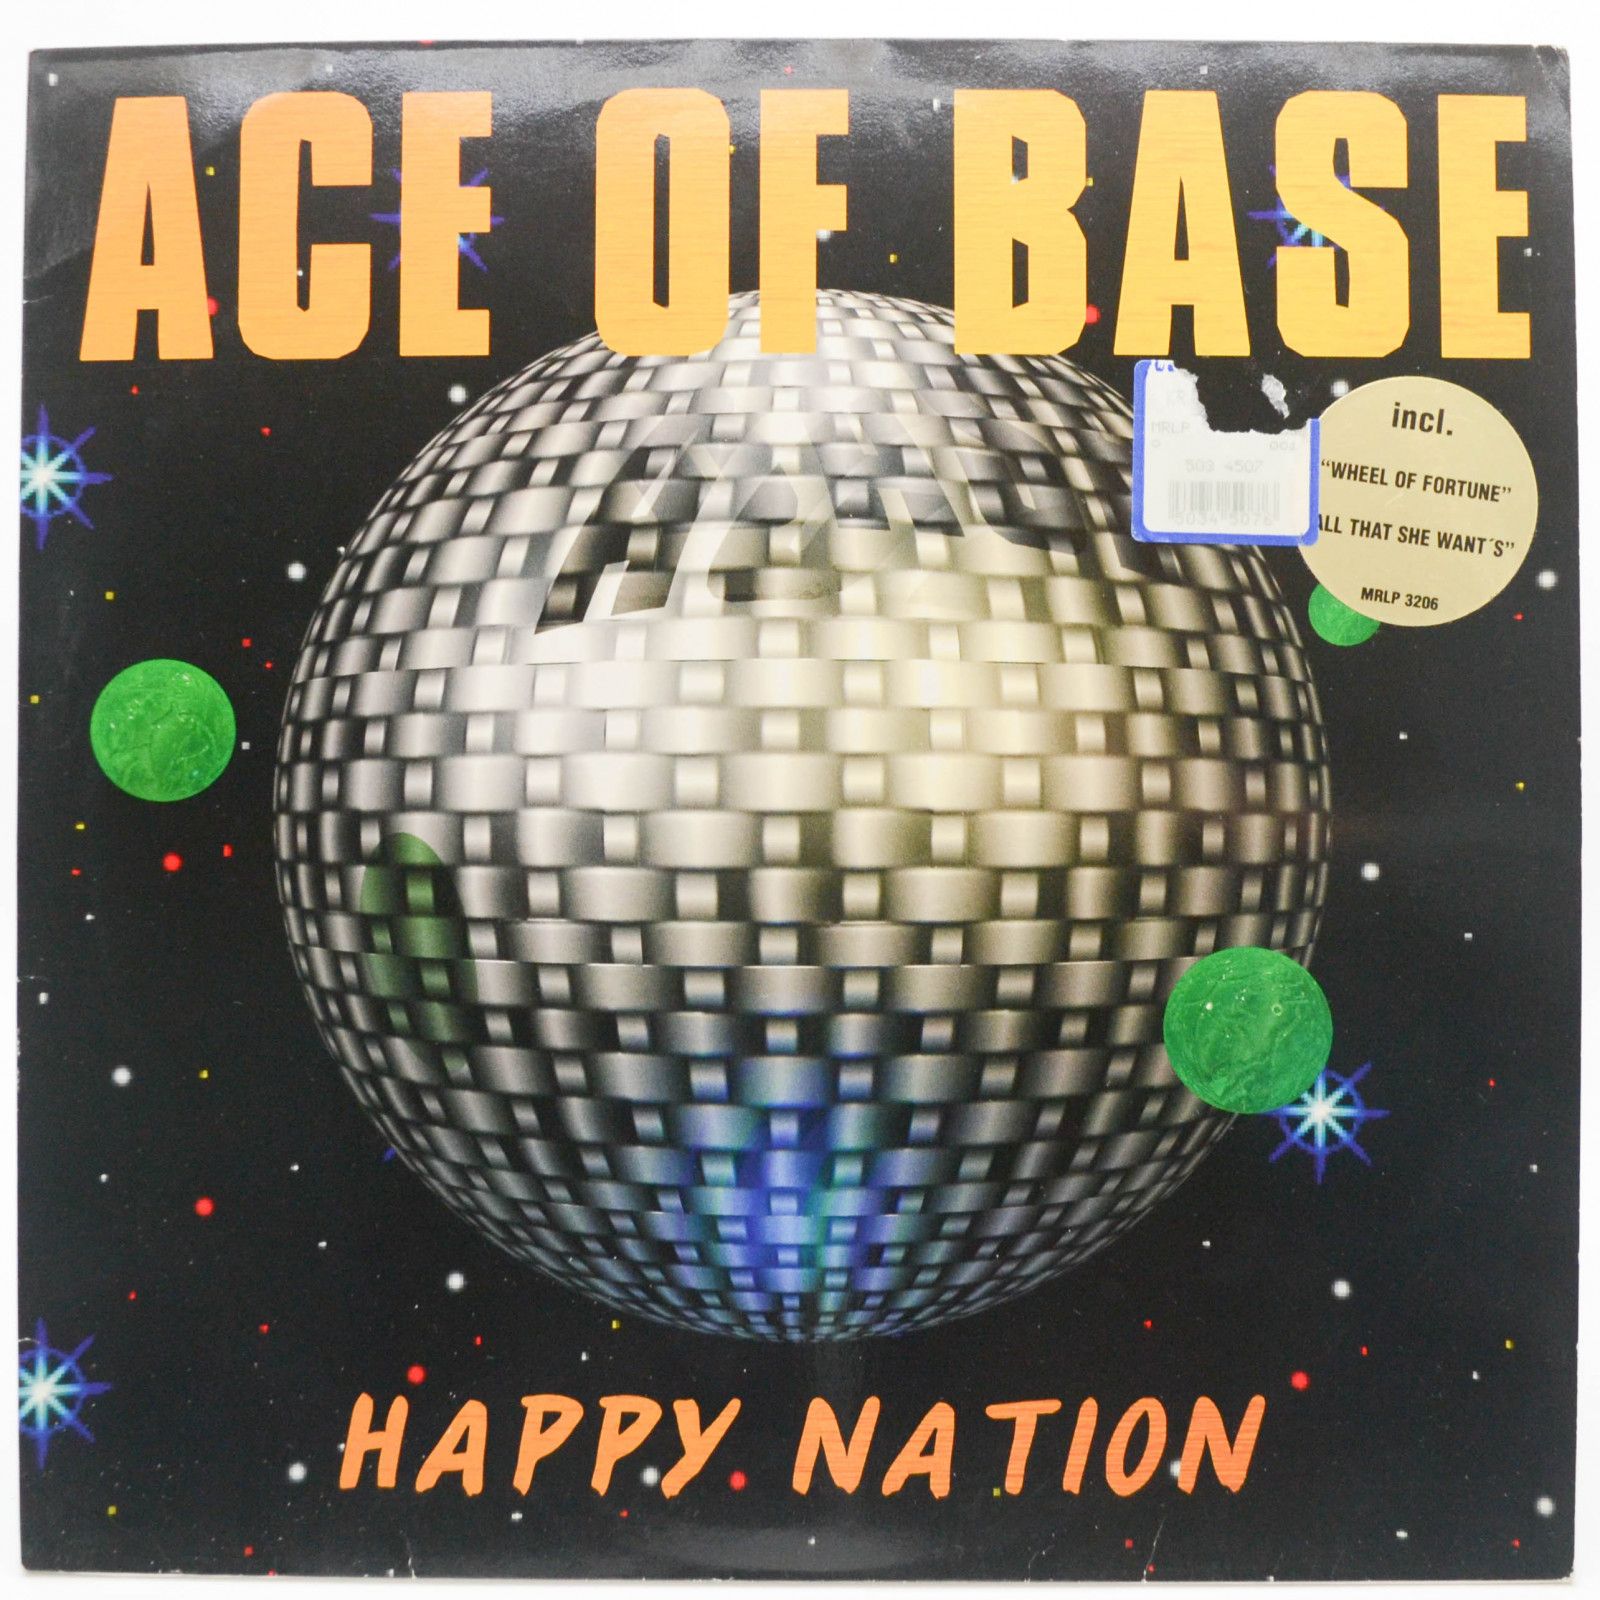 Happy nation remix fred